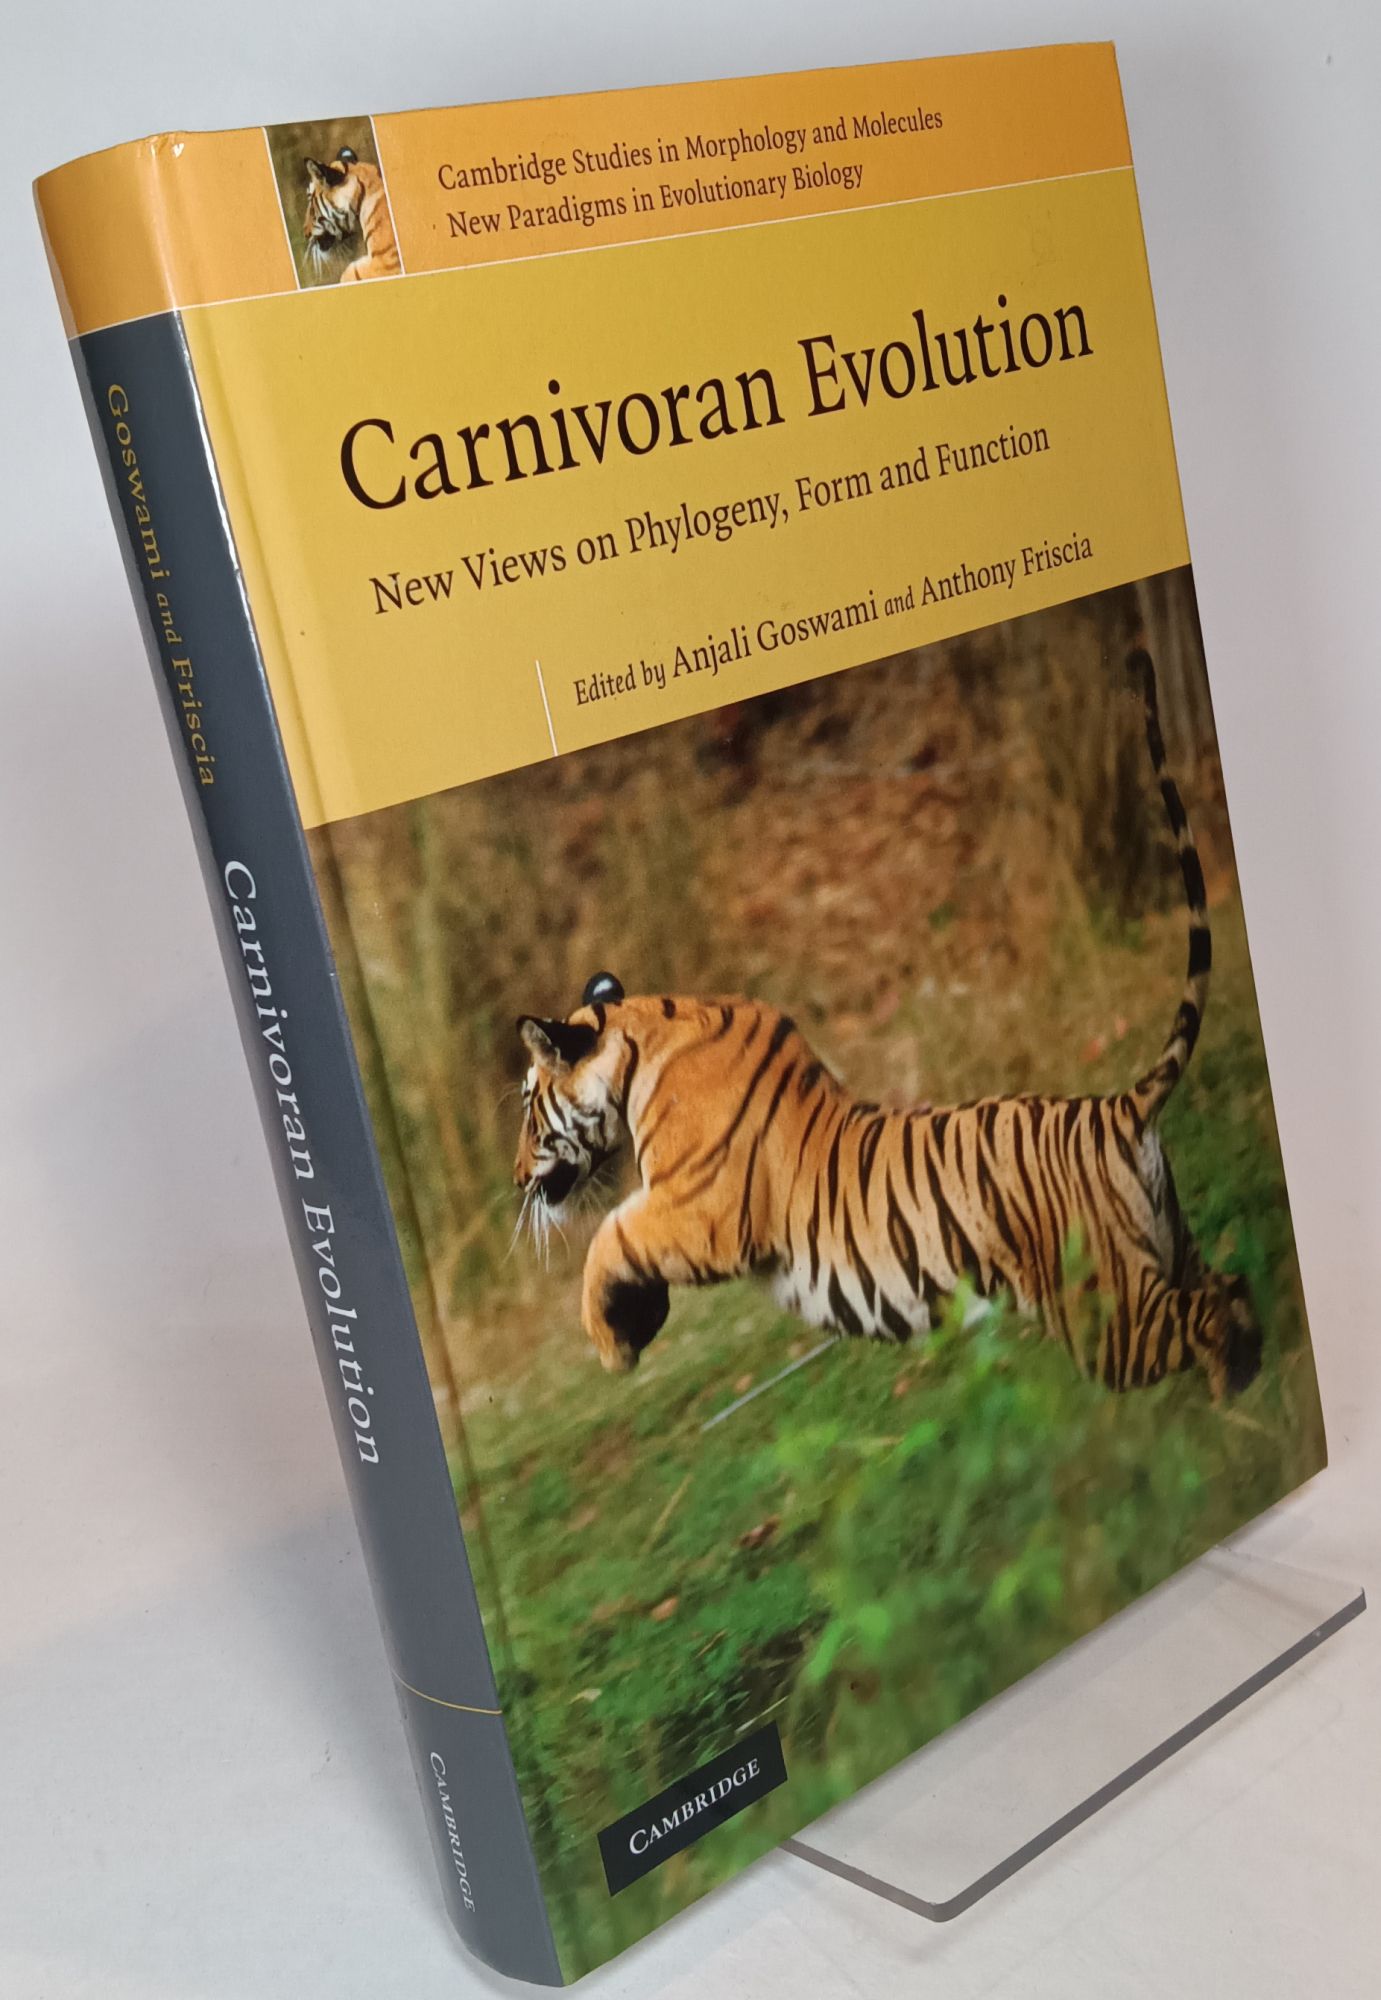 Carnivorian Evolution: New Views on Phylogeny, Form and Function - GOSWAMI, Anjali & FRISCIA, Anthony (eds.)